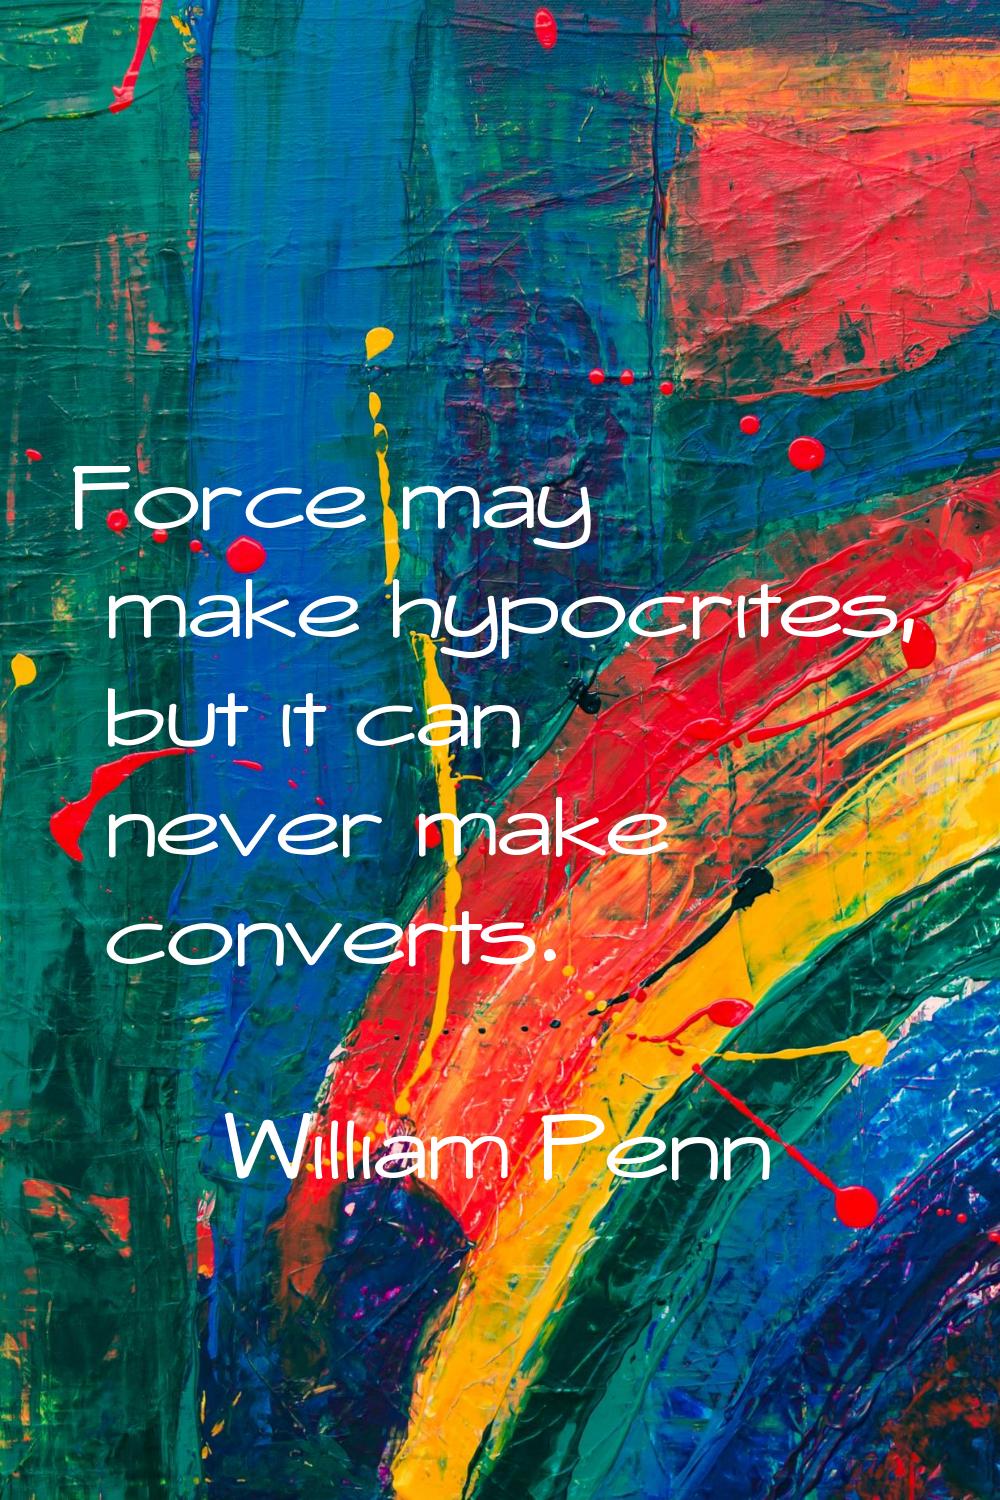 Force may make hypocrites, but it can never make converts.